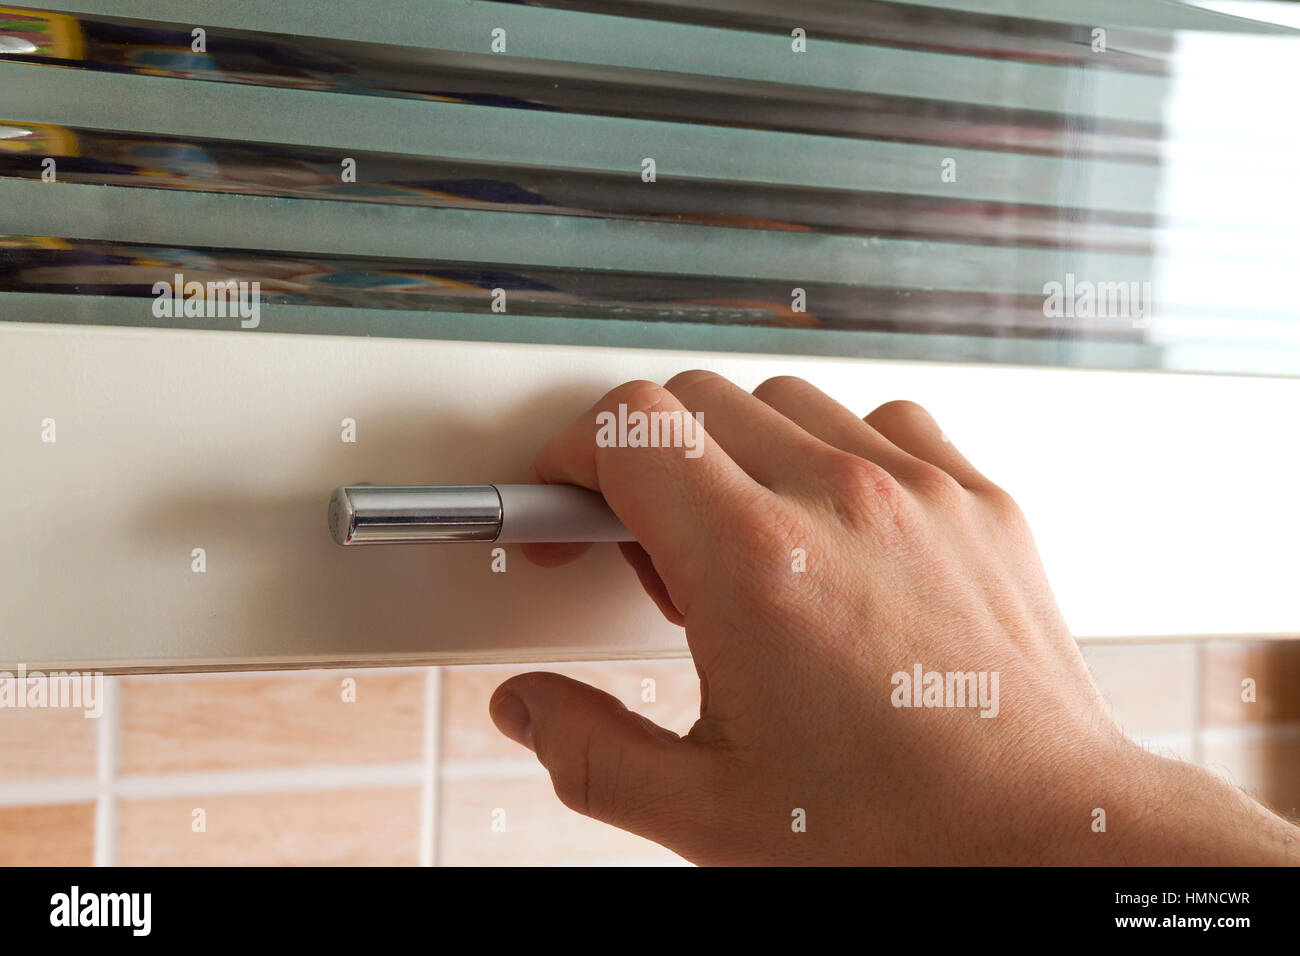 Mans hand open the kitchen cupboard doors, close up Stock Photo